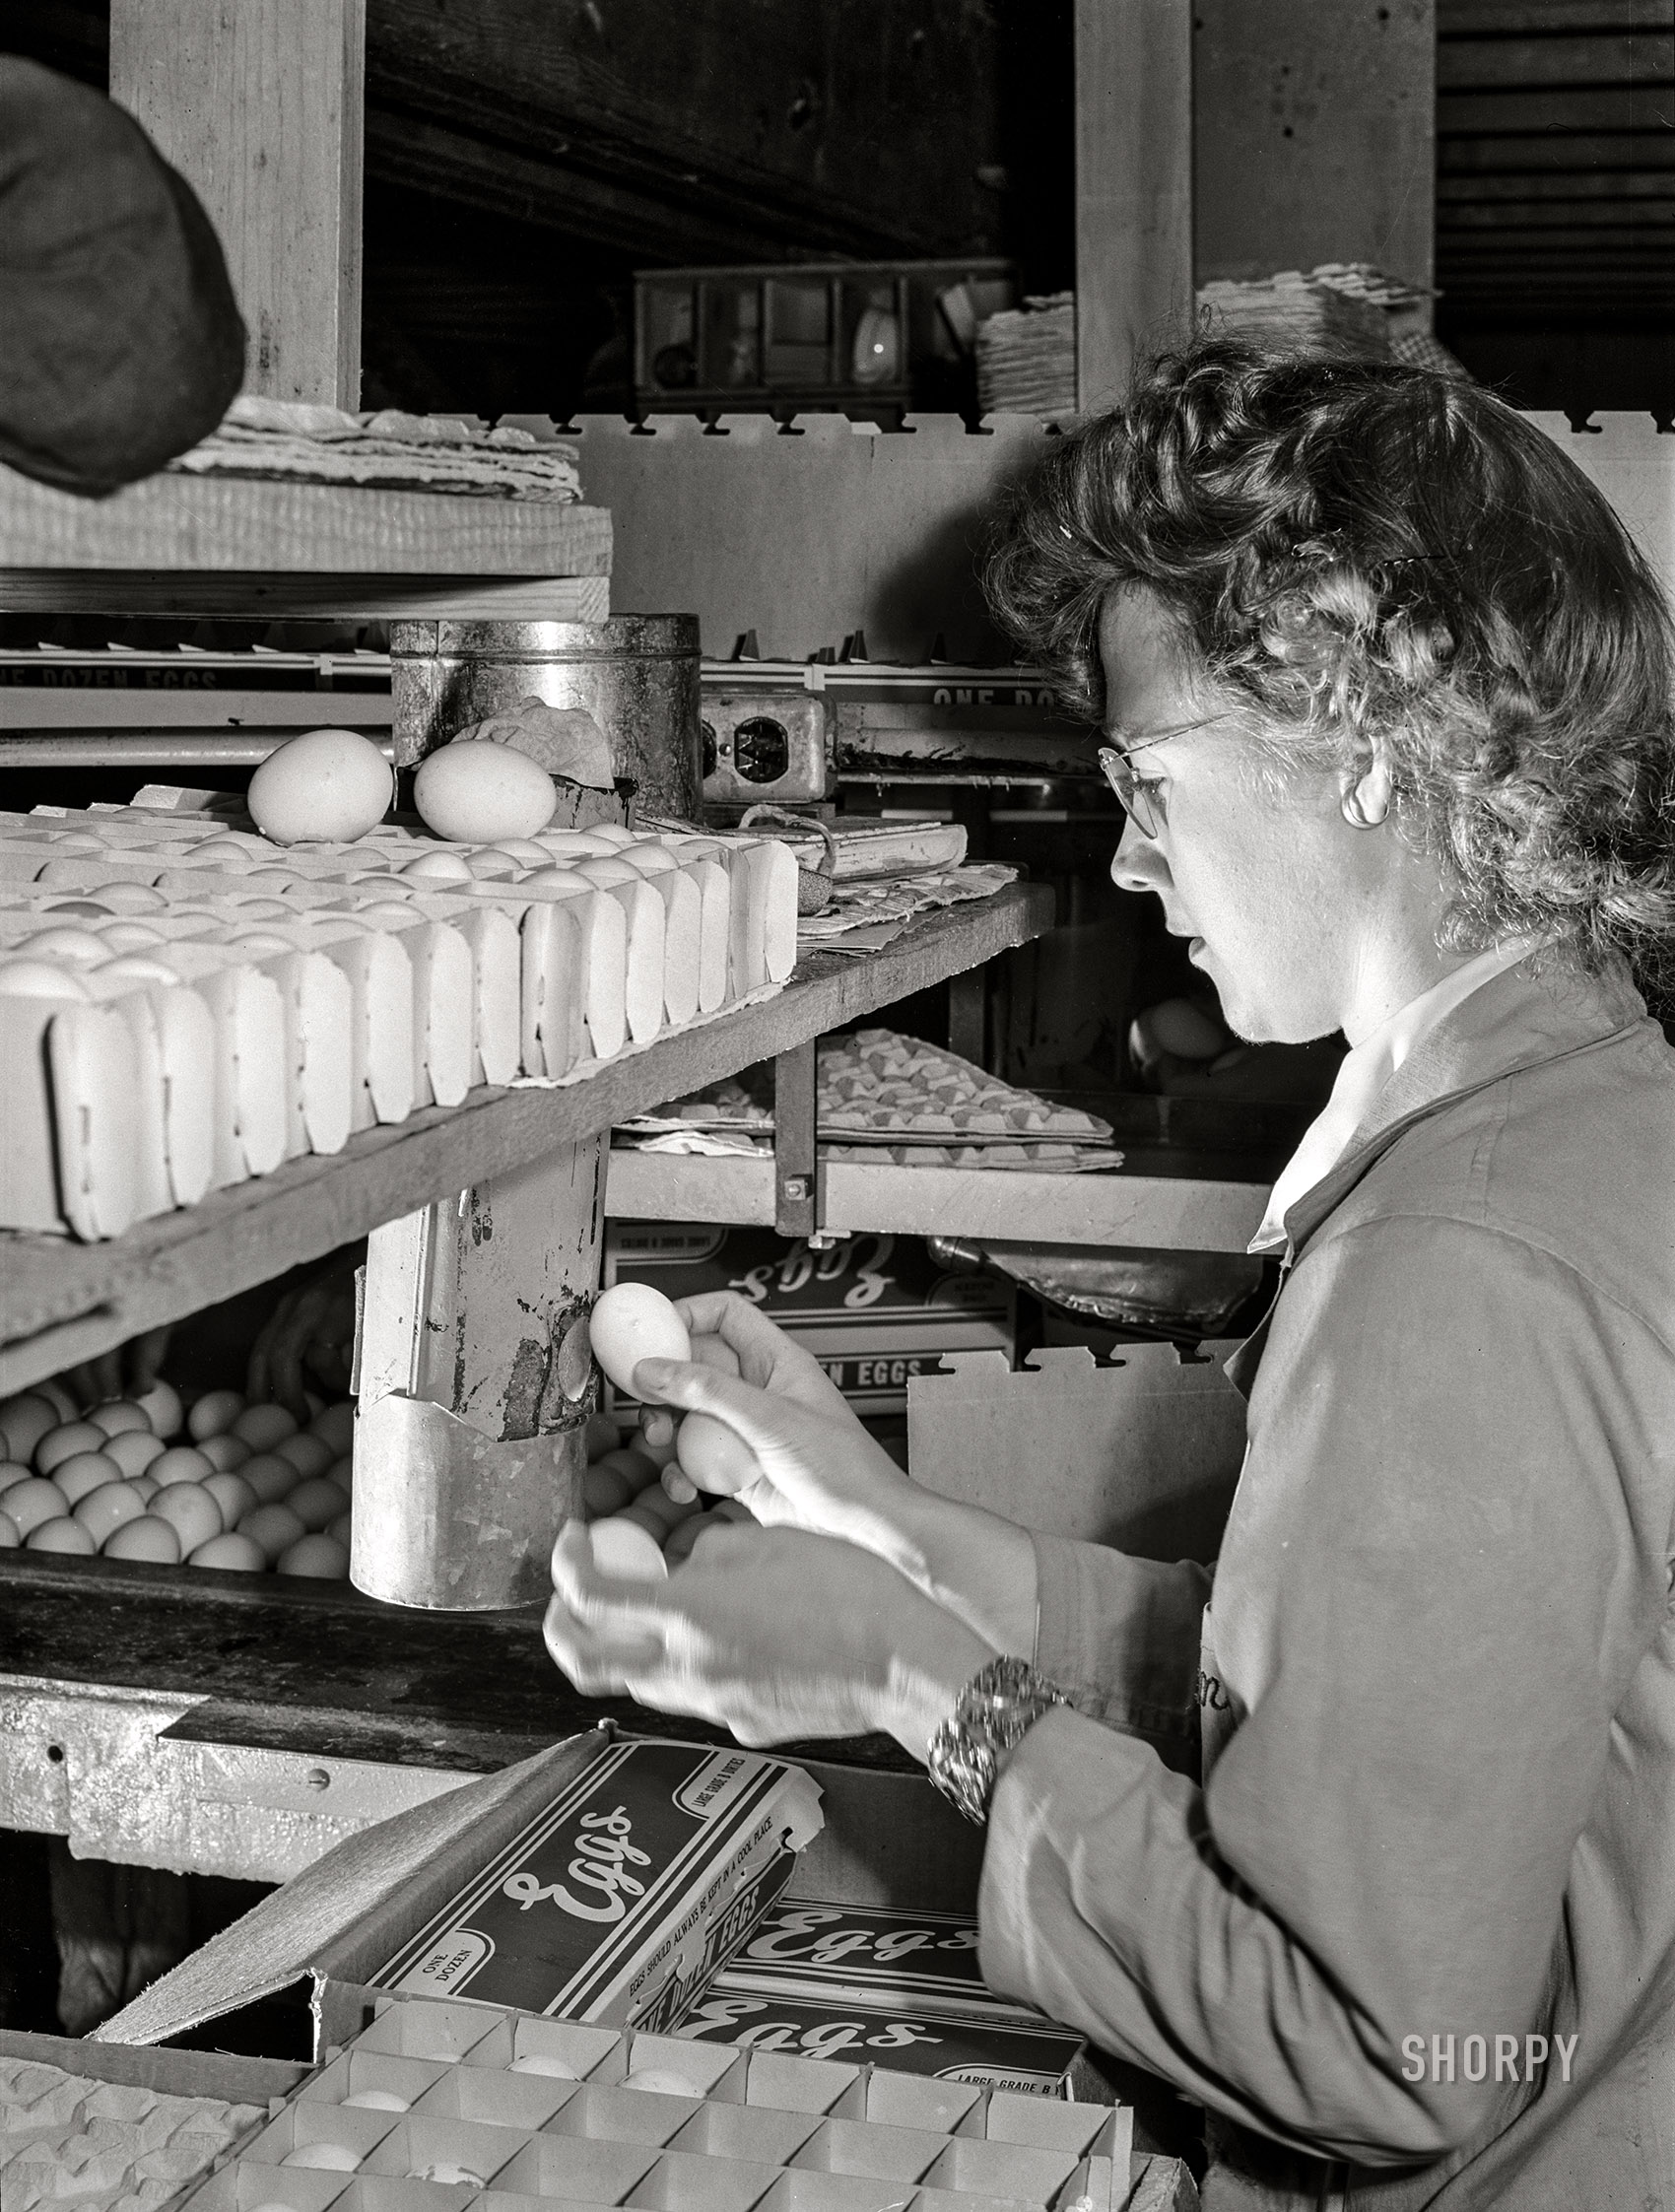 January 1942. "Petaluma, Sonoma County, California. Candling eggs in an egg packing plant." In contrast to the Grade AA Specials seen previously, what we have here are cartons marked "Large Grade B Dirties." Photo by Russell Lee, Farm Security Administration. View full size.